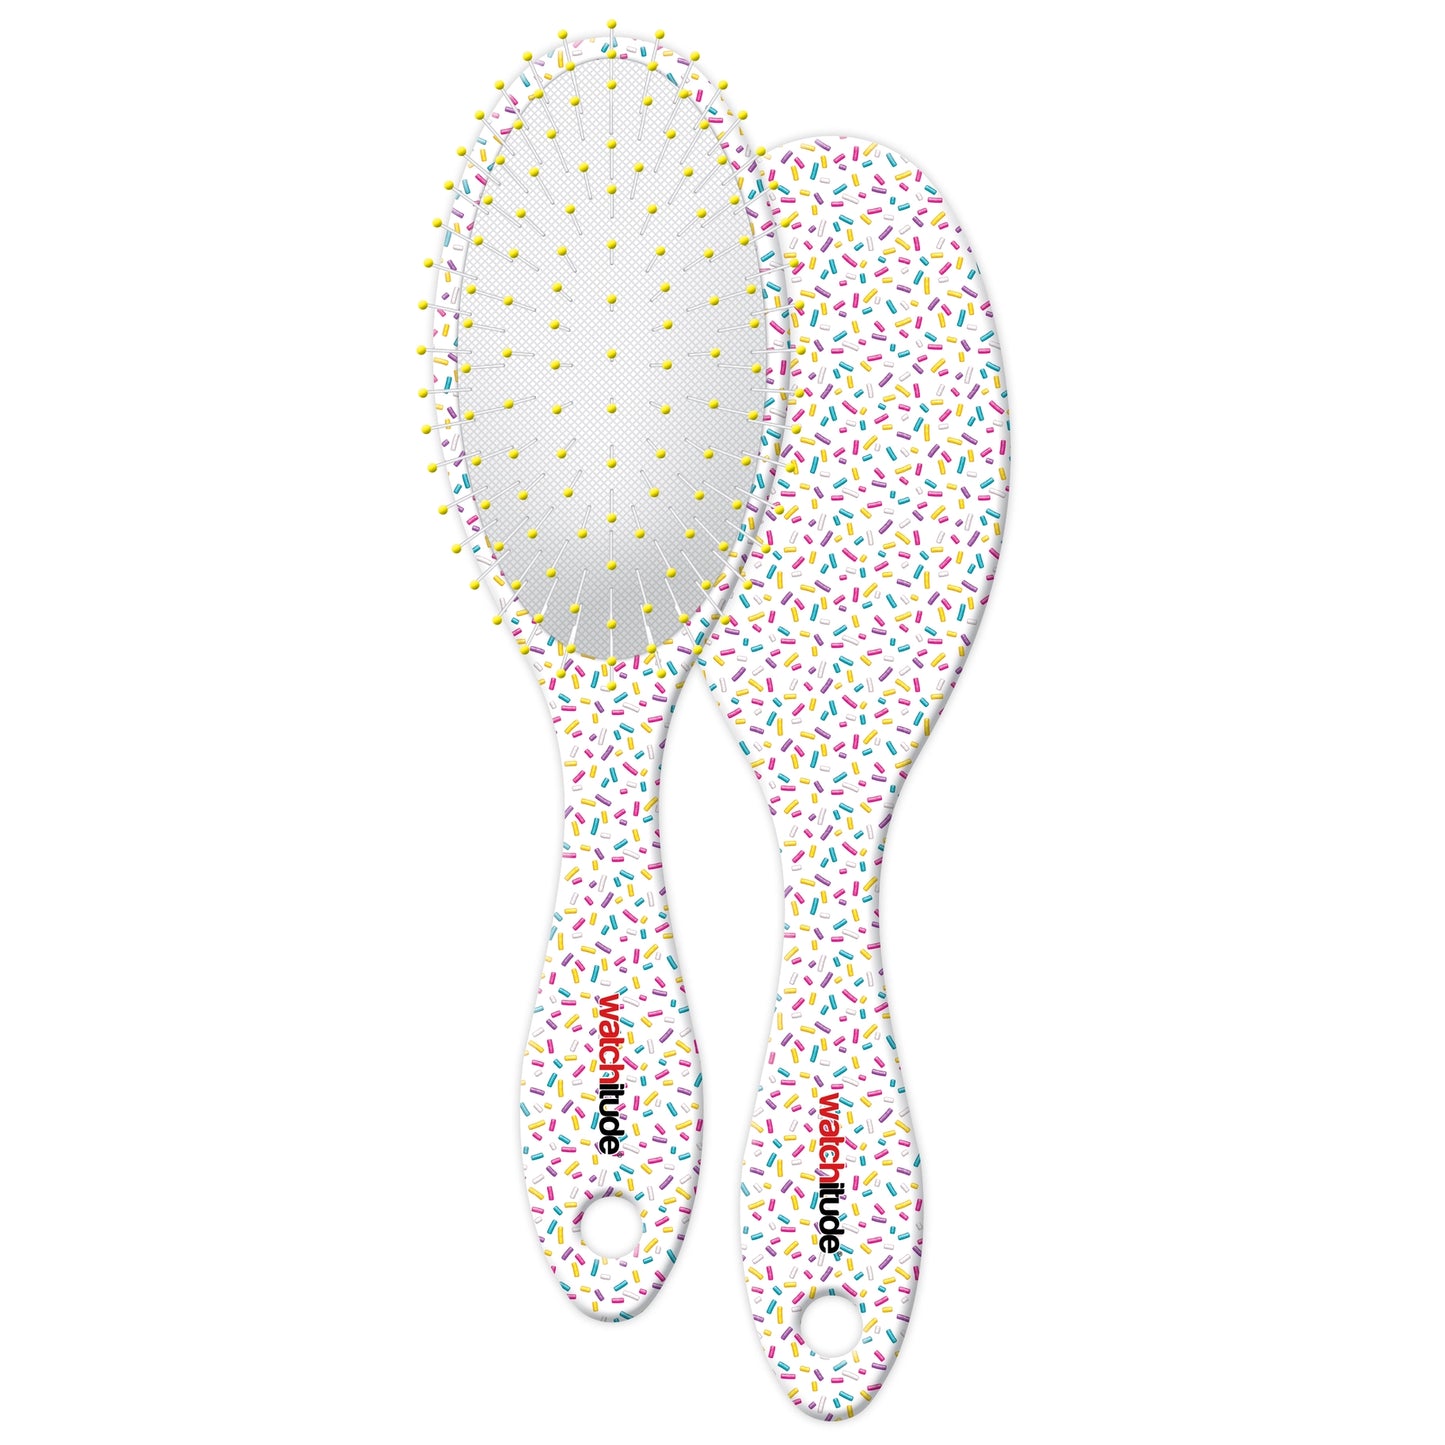 White hairbrush with multi-colored confetti sprinkles and white bristles with yellow tips.